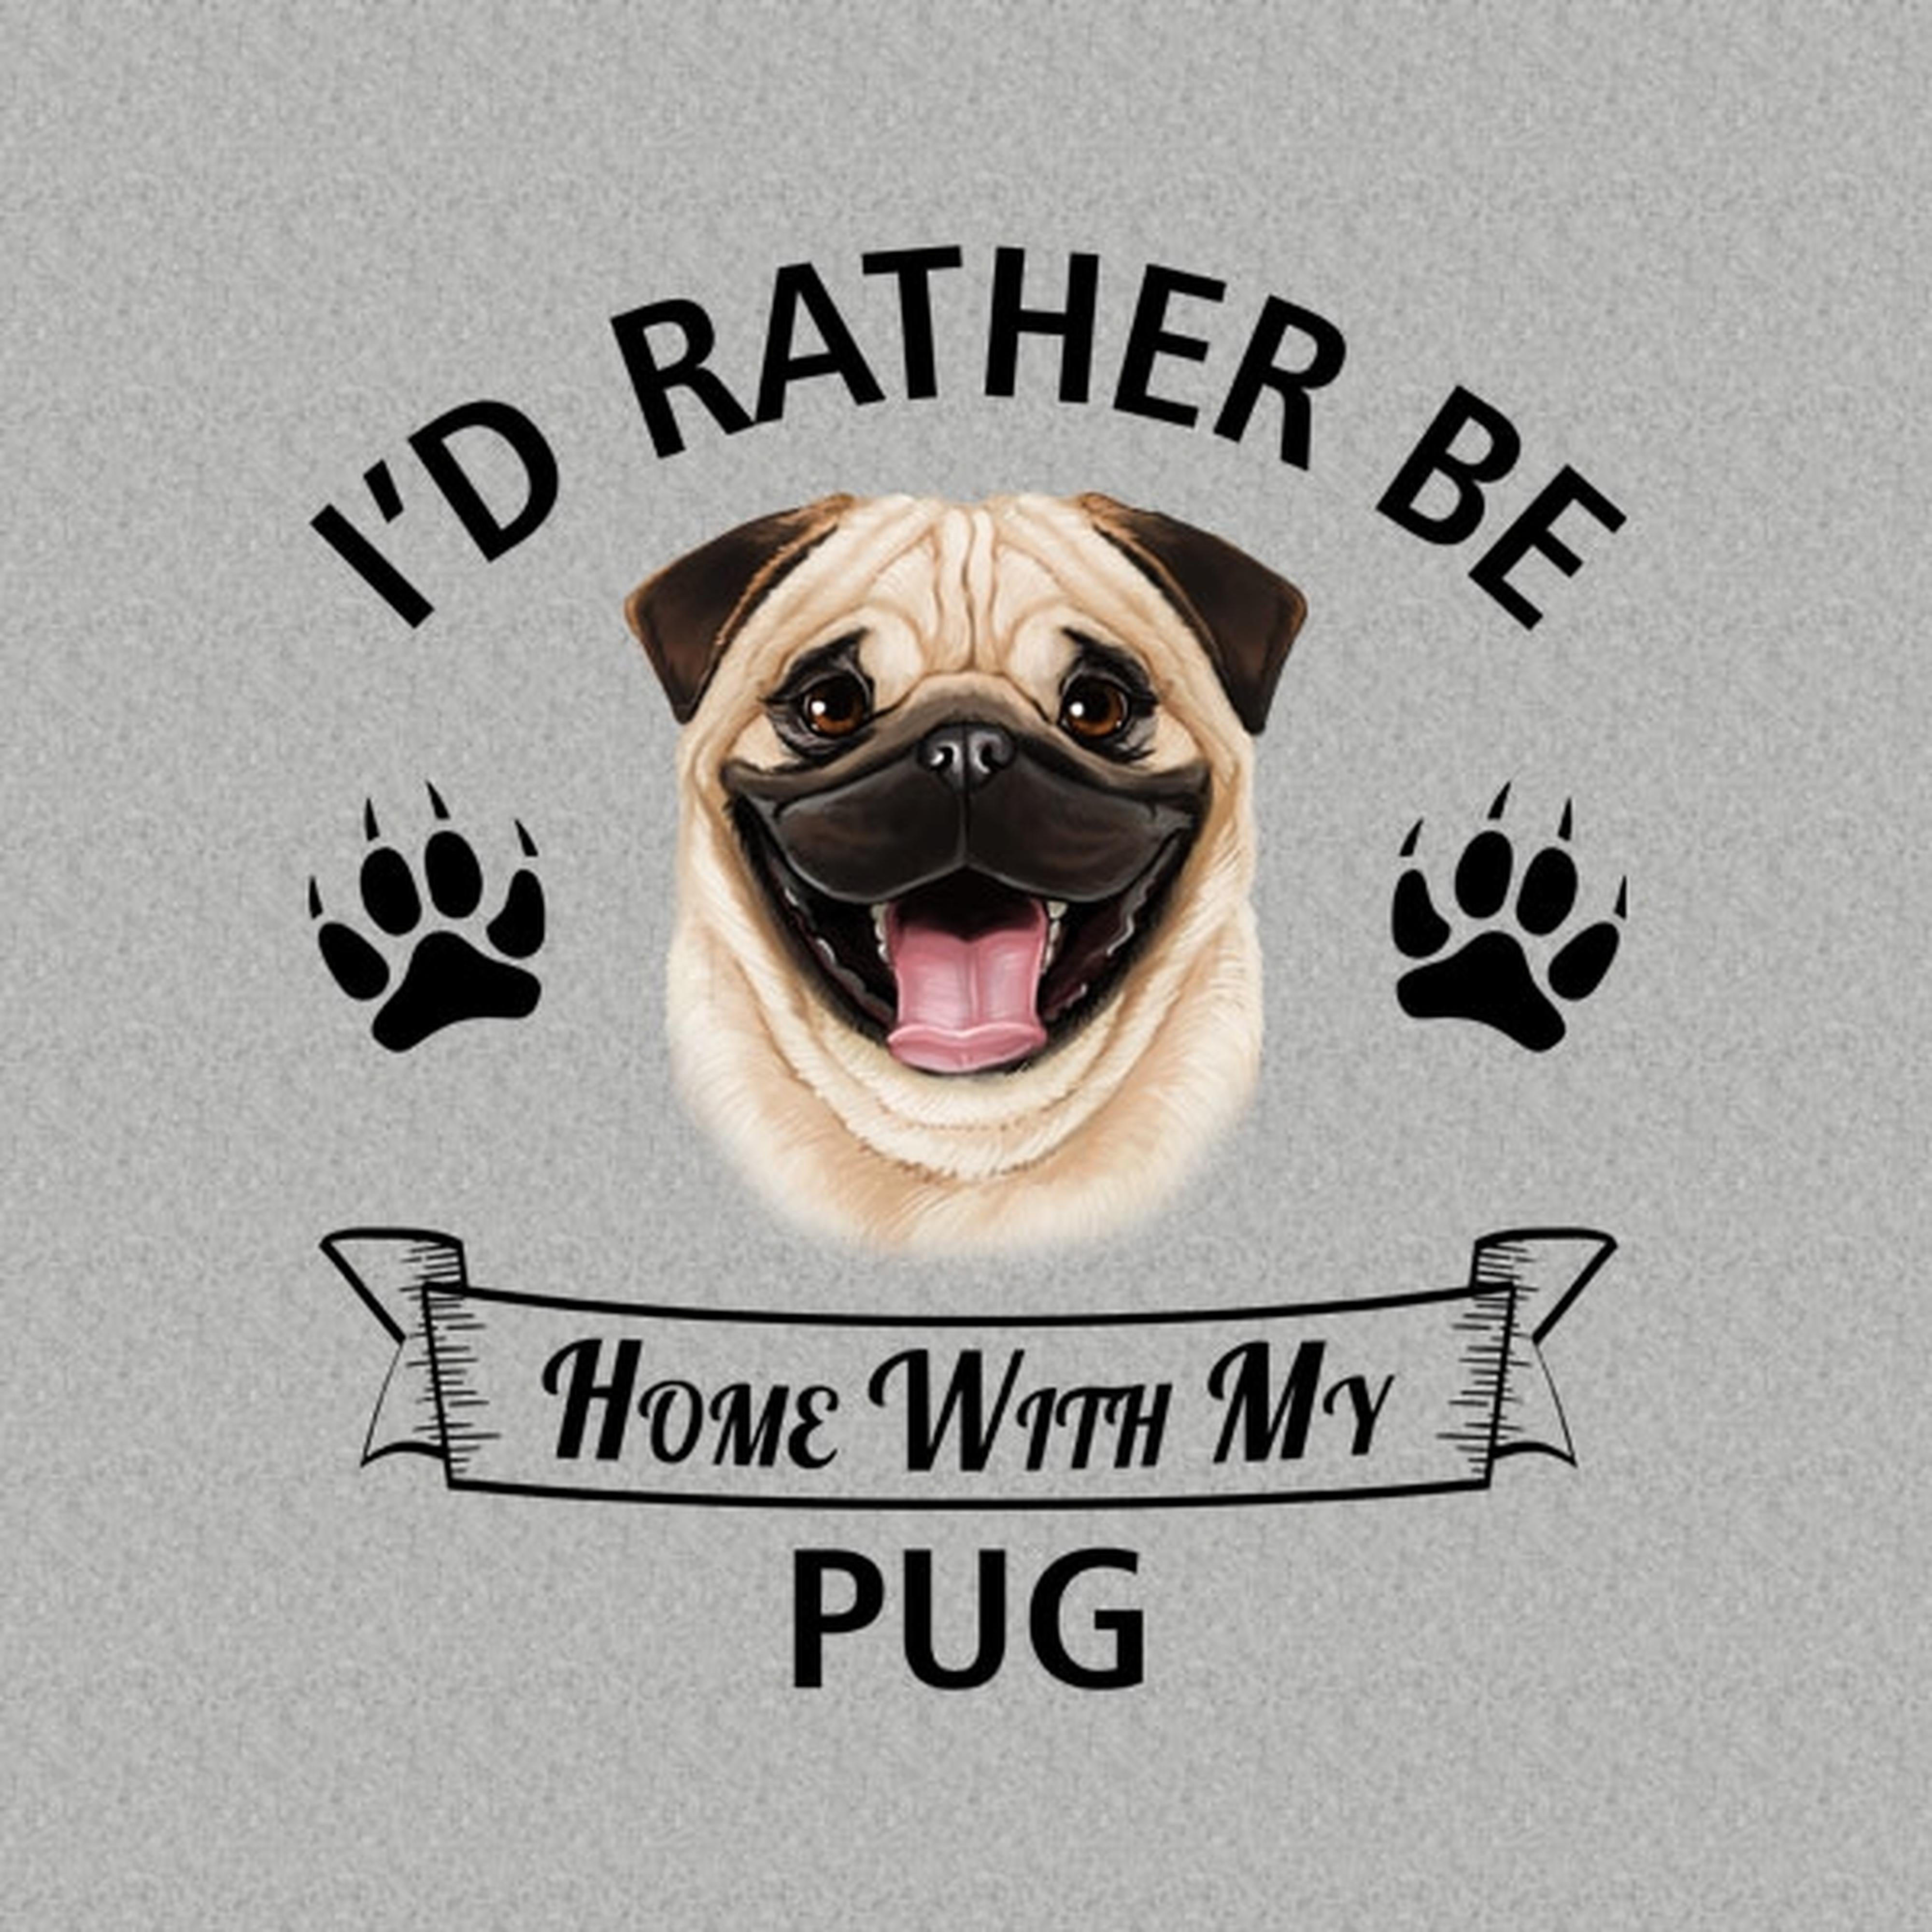 I'd rather stay home with my Pug - T-shirt